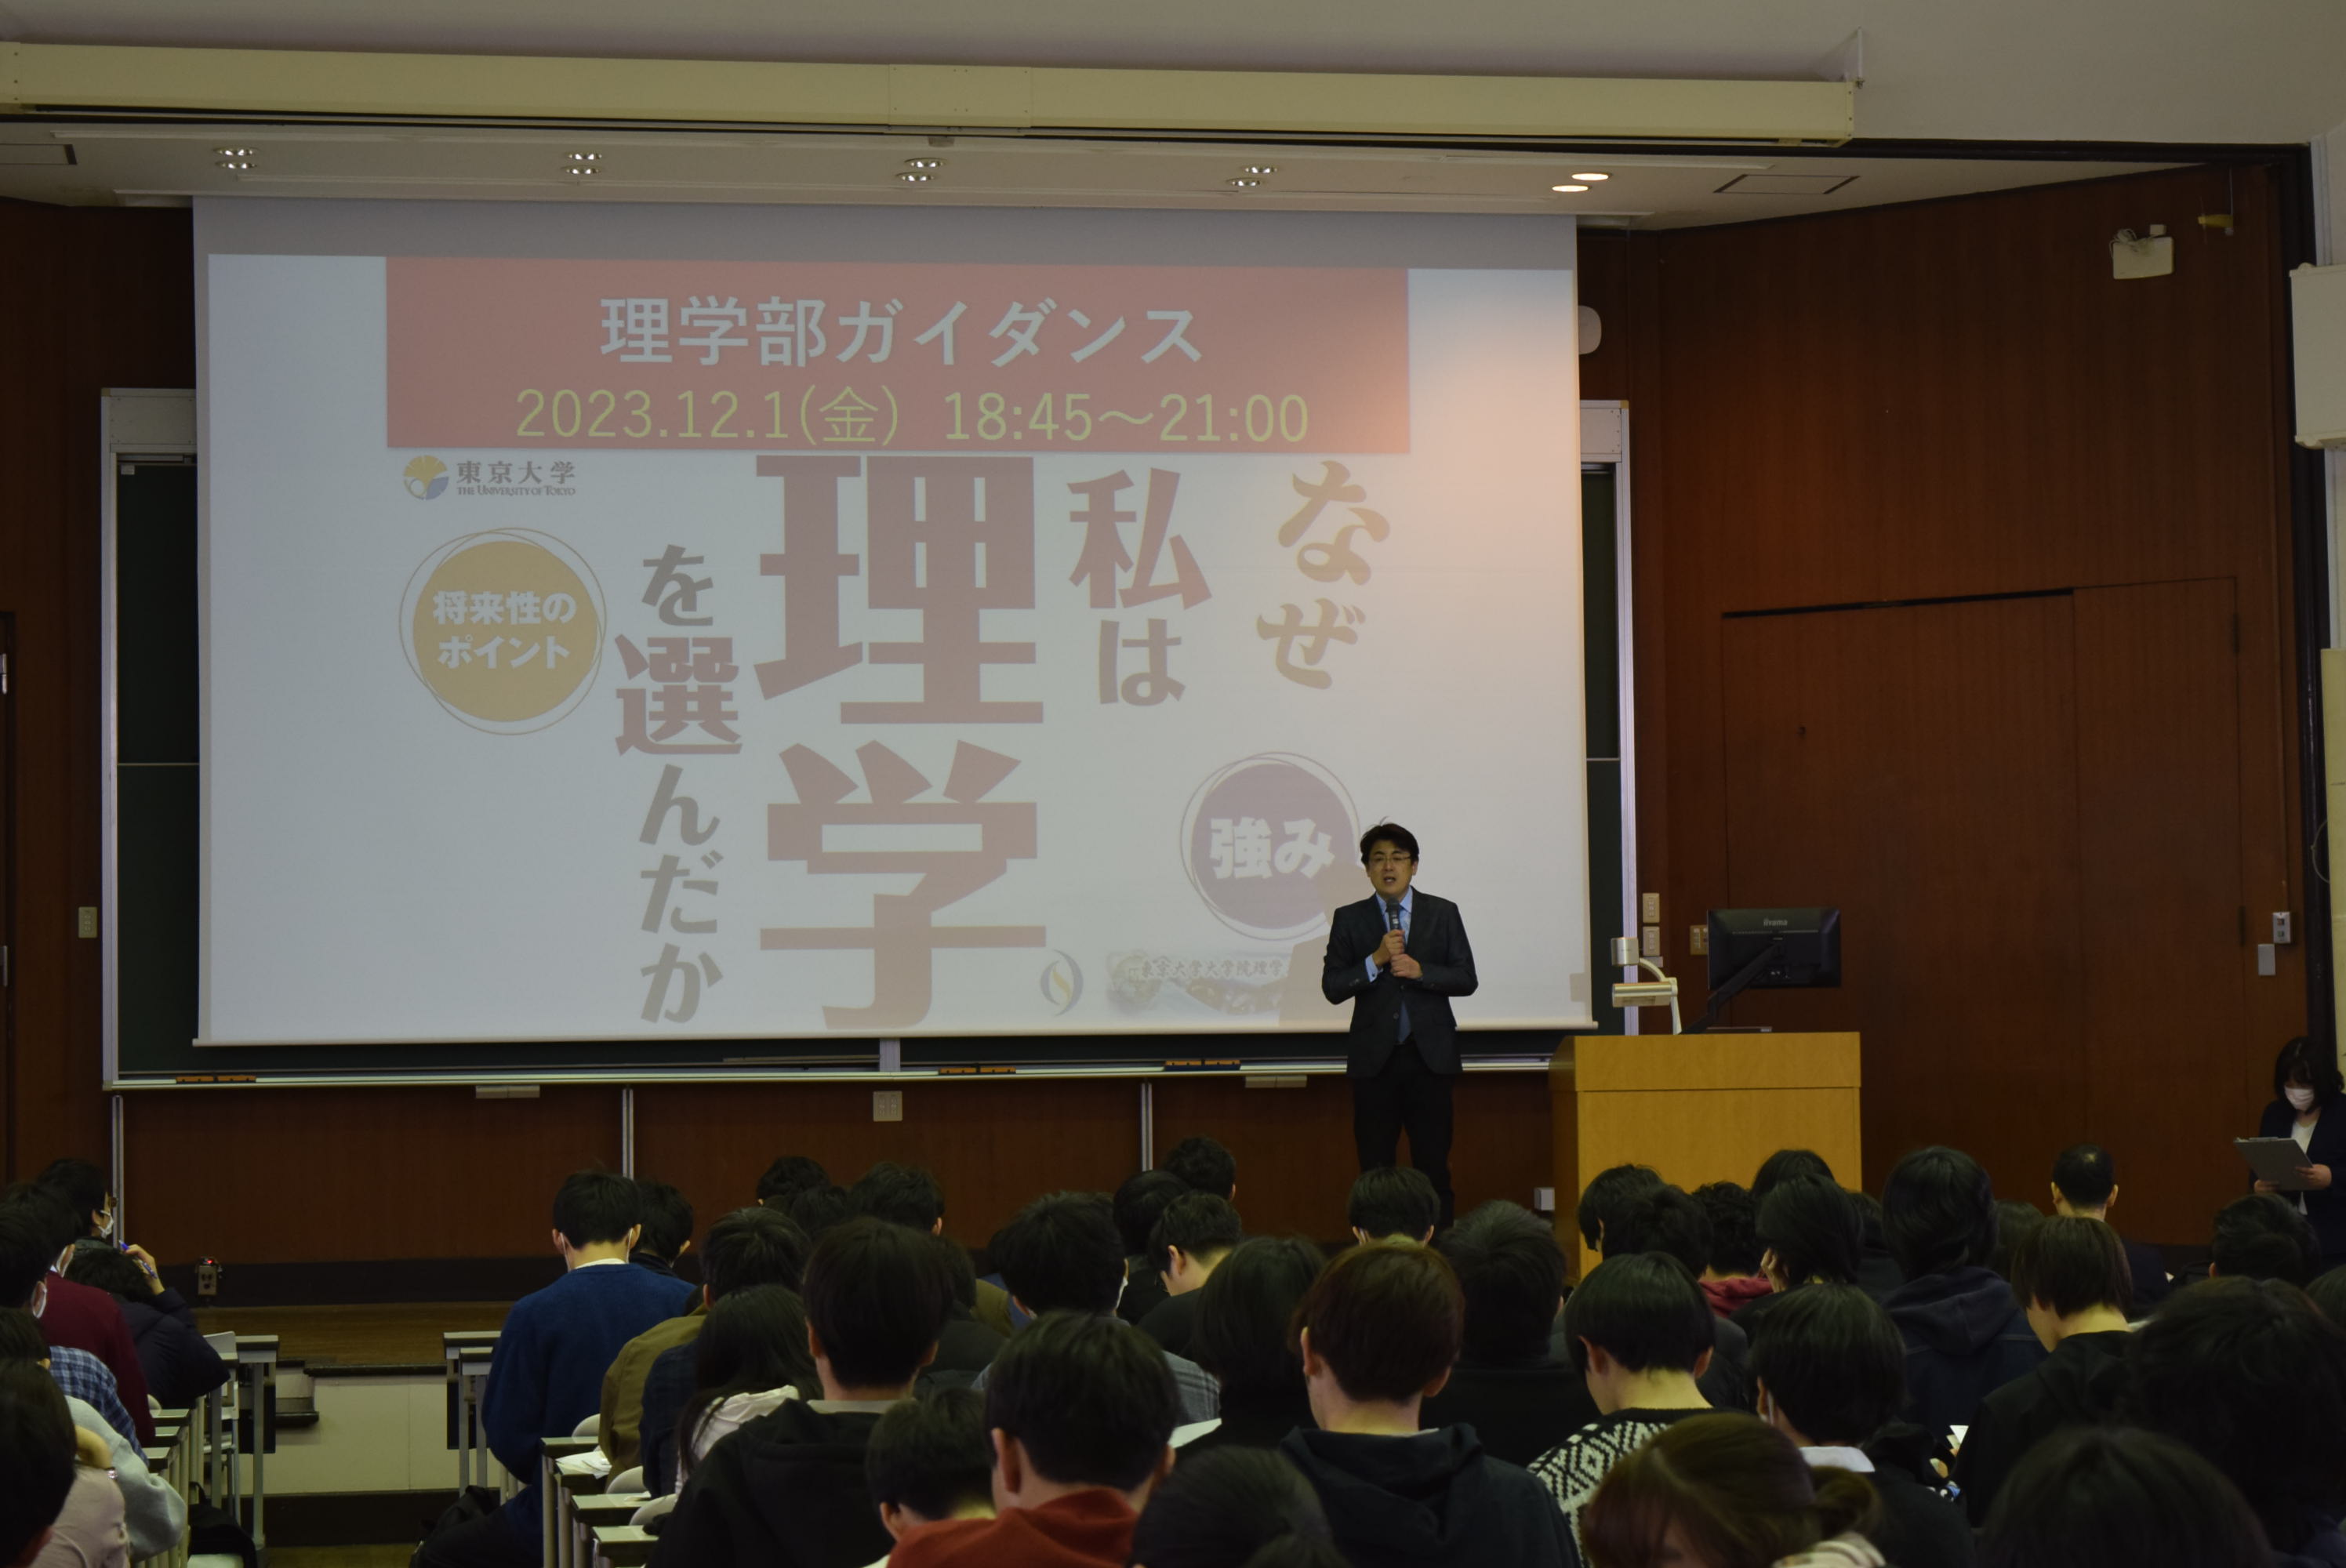 Topics : Report on the School of Science Guidance for first-year undergraduates at Komaba.